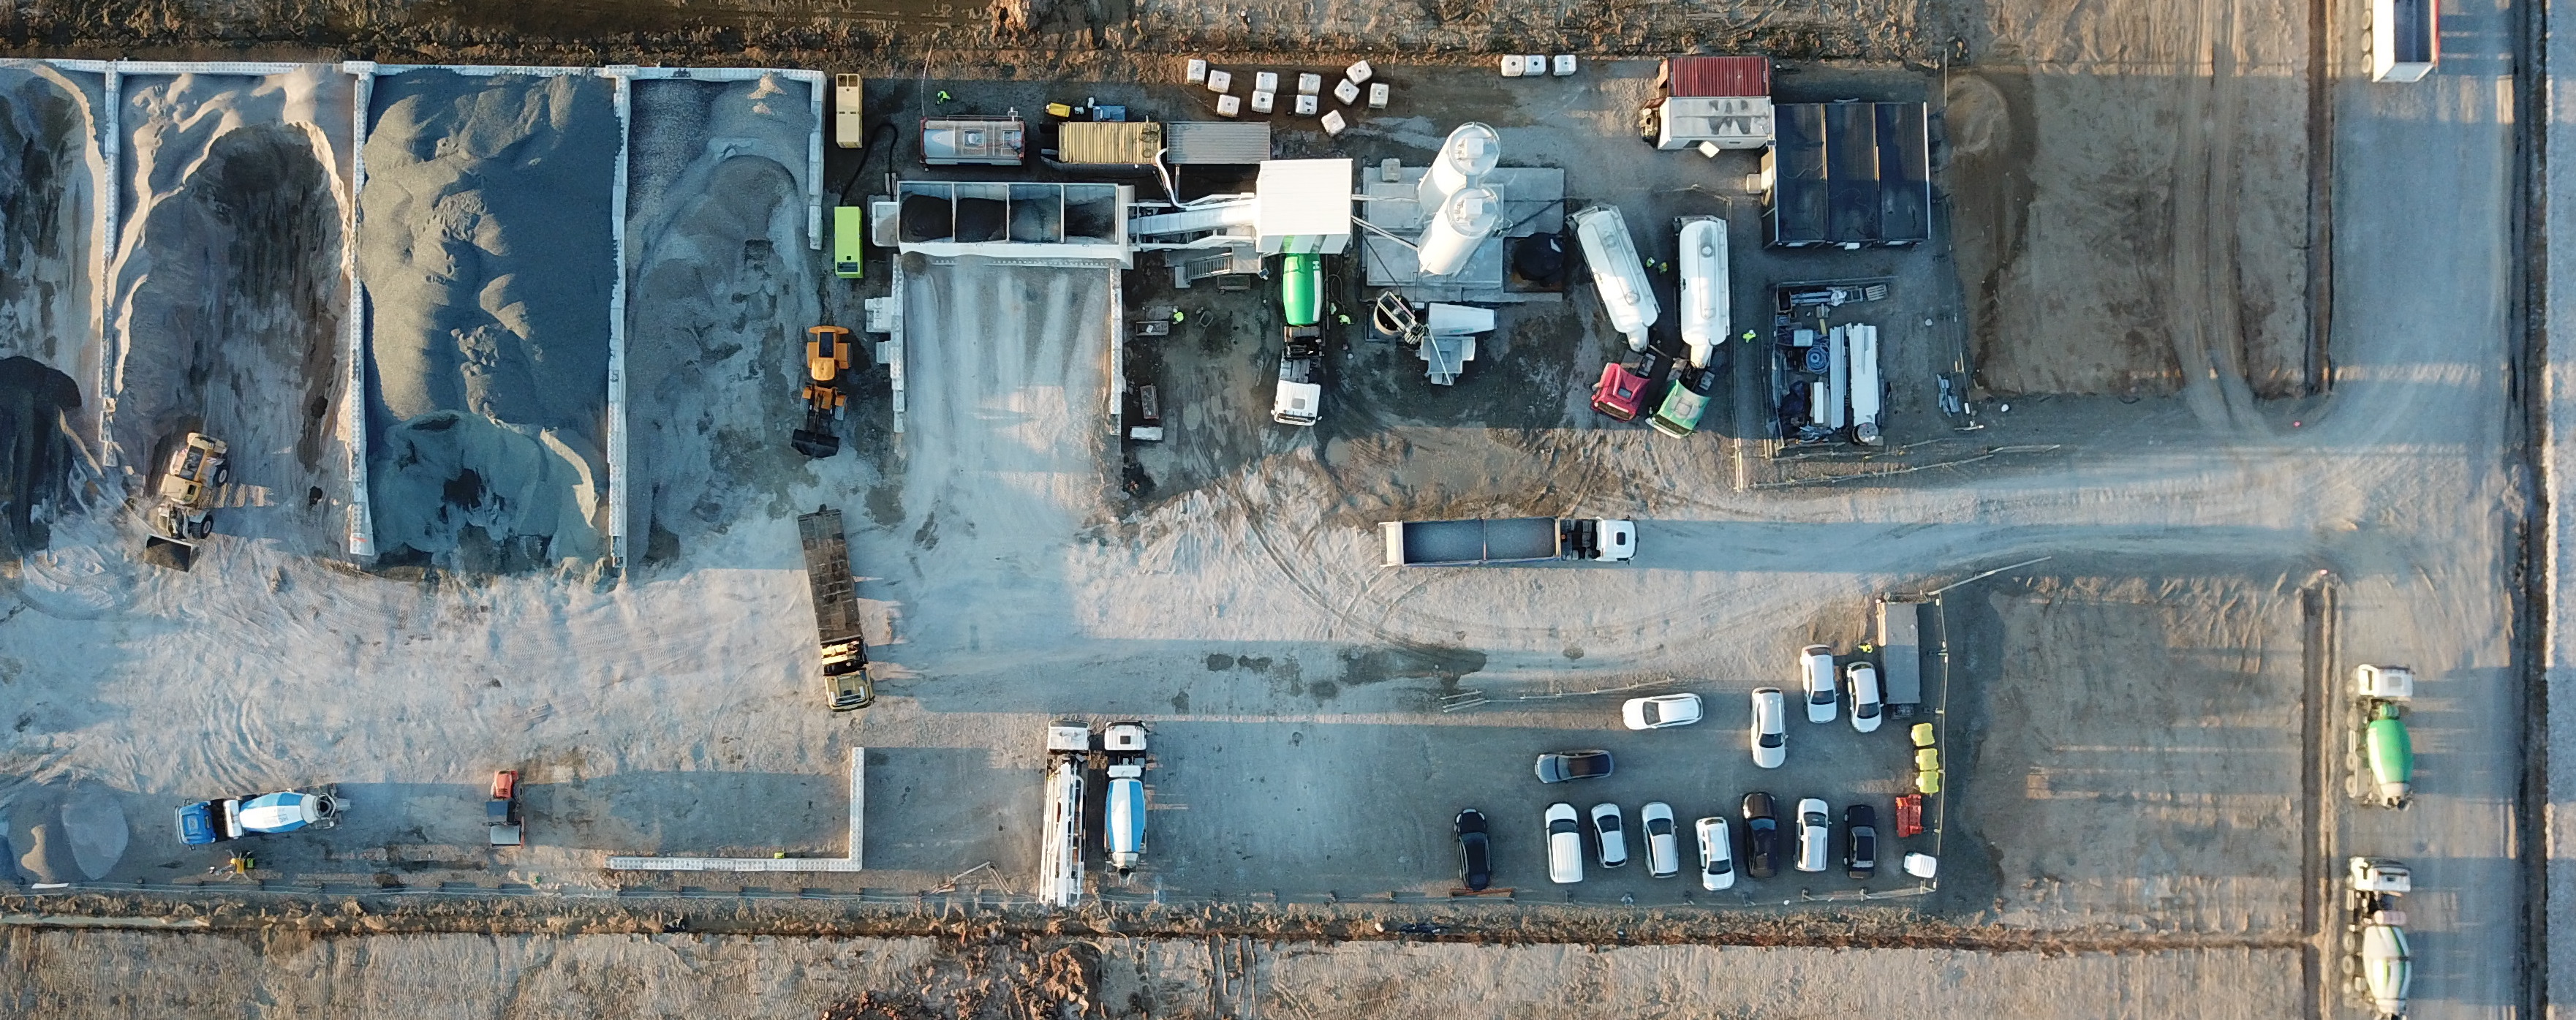 Bird's eye view of the construction site: various building machines, trucks, cars and silos